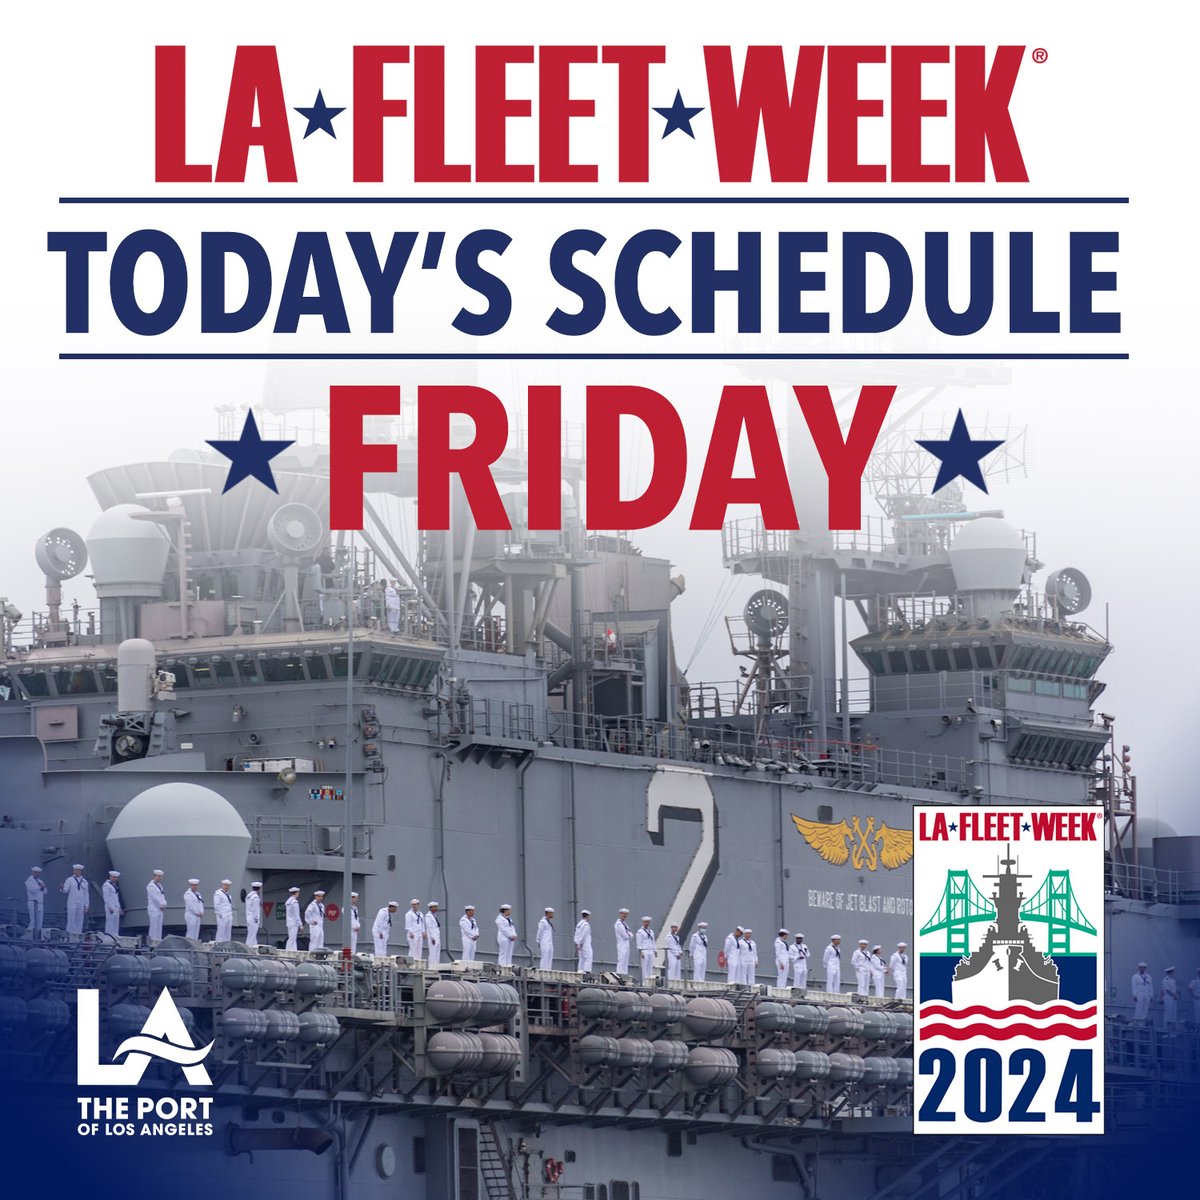 🇺🇸⚓#LAFleetWeek2024 is officially underway at the Port of Los Angeles! Free public ship tours are from 10 a.m.-4 p.m. Arrive early; event may reach max capacity.

For event updates, follow @LAFleetWeek and check the daily schedule here. ⬇️
lafleetweek.com/events_schedul…